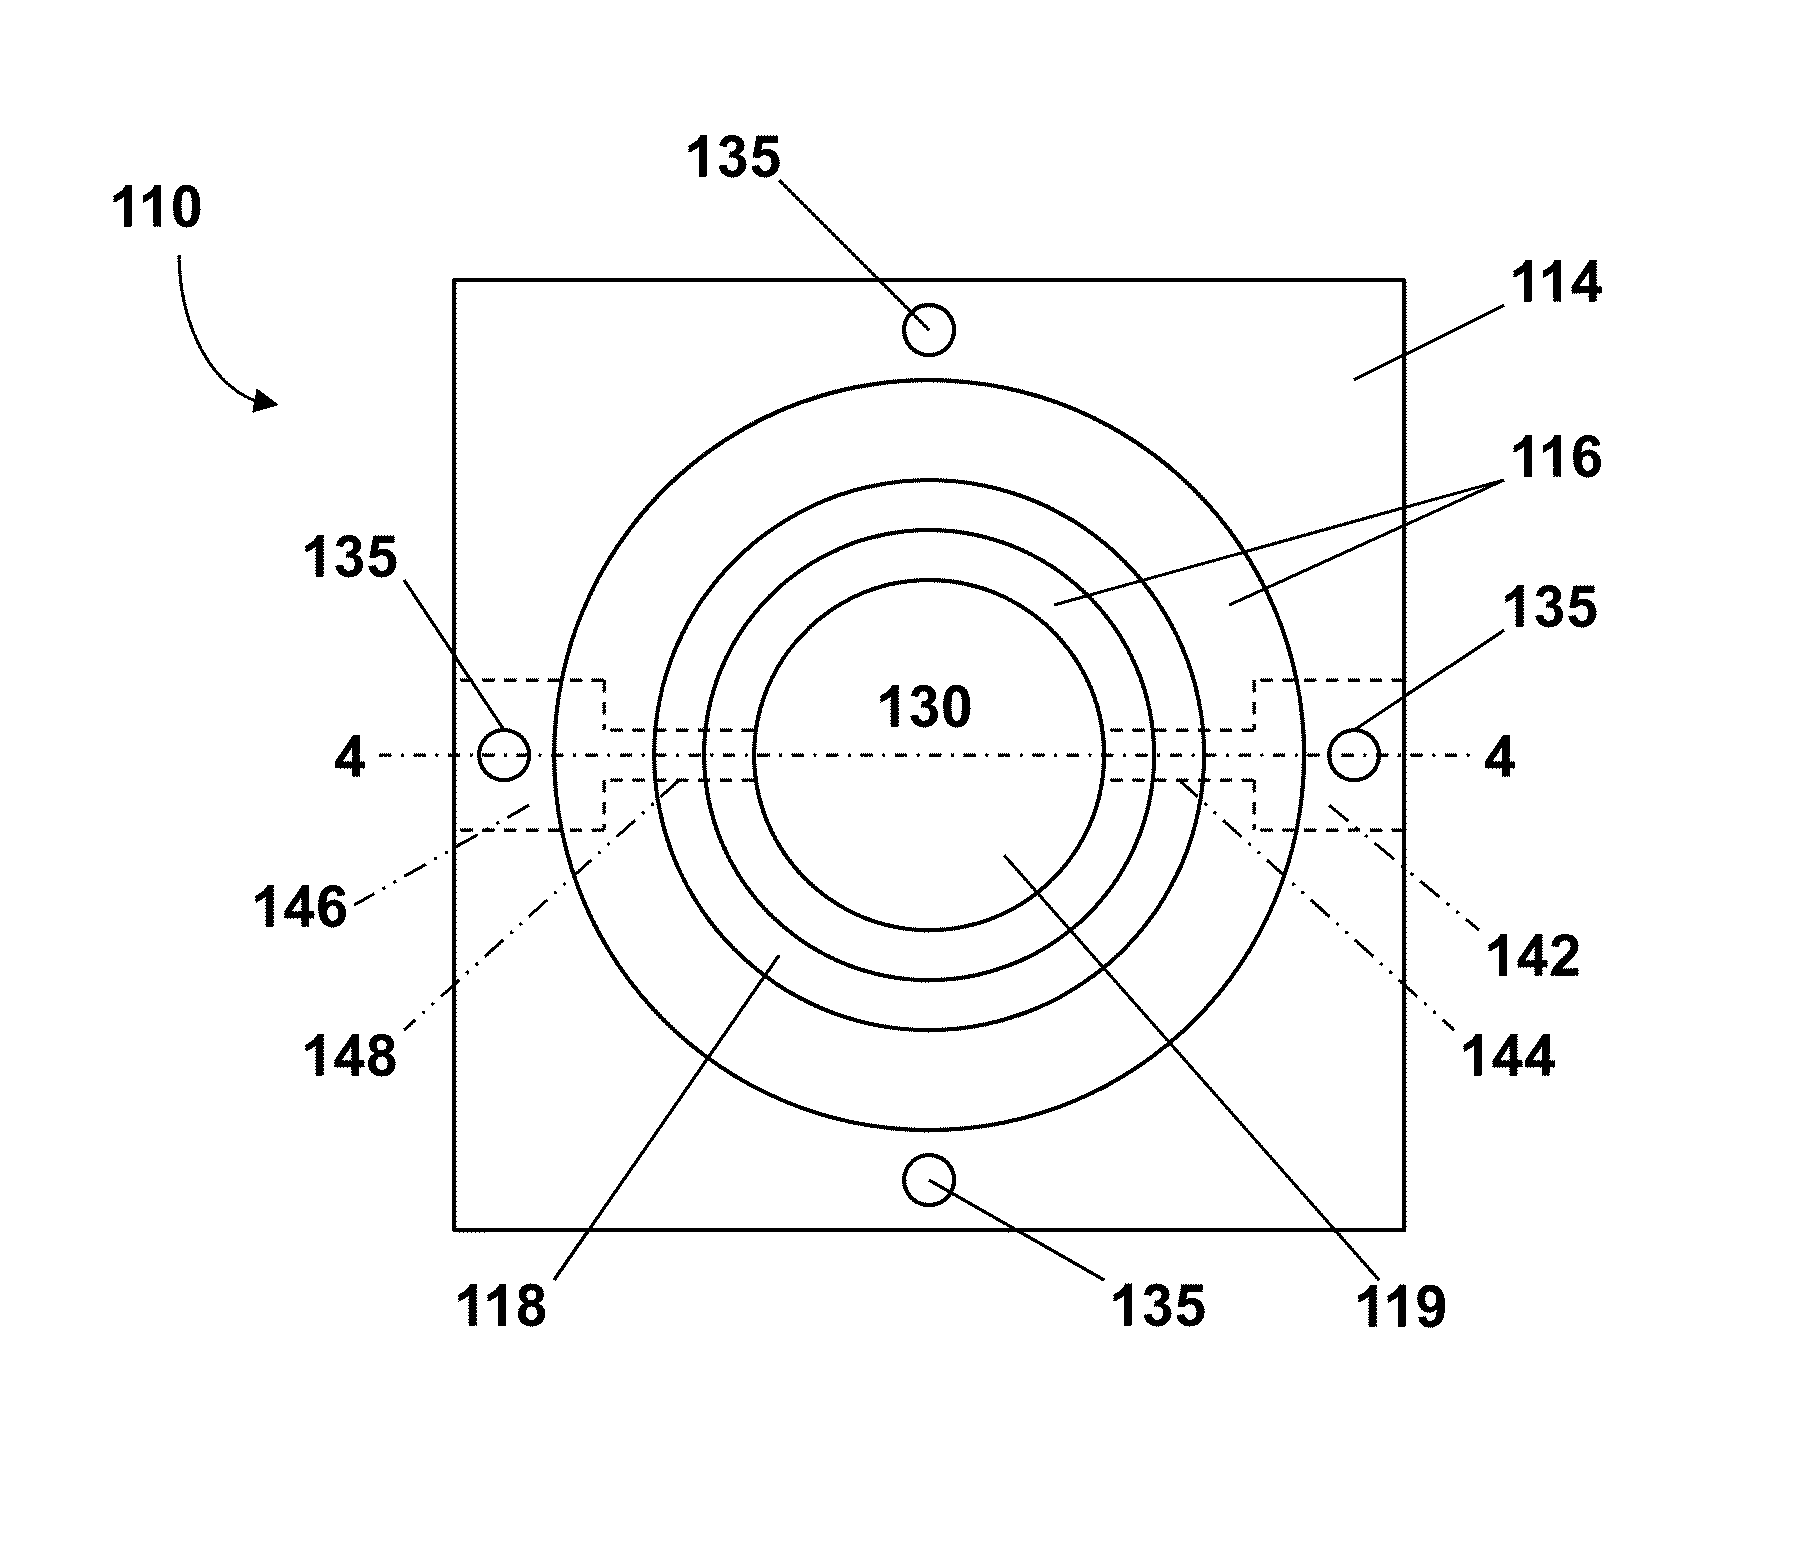 Permeability flow cell and hydraulic conductance system